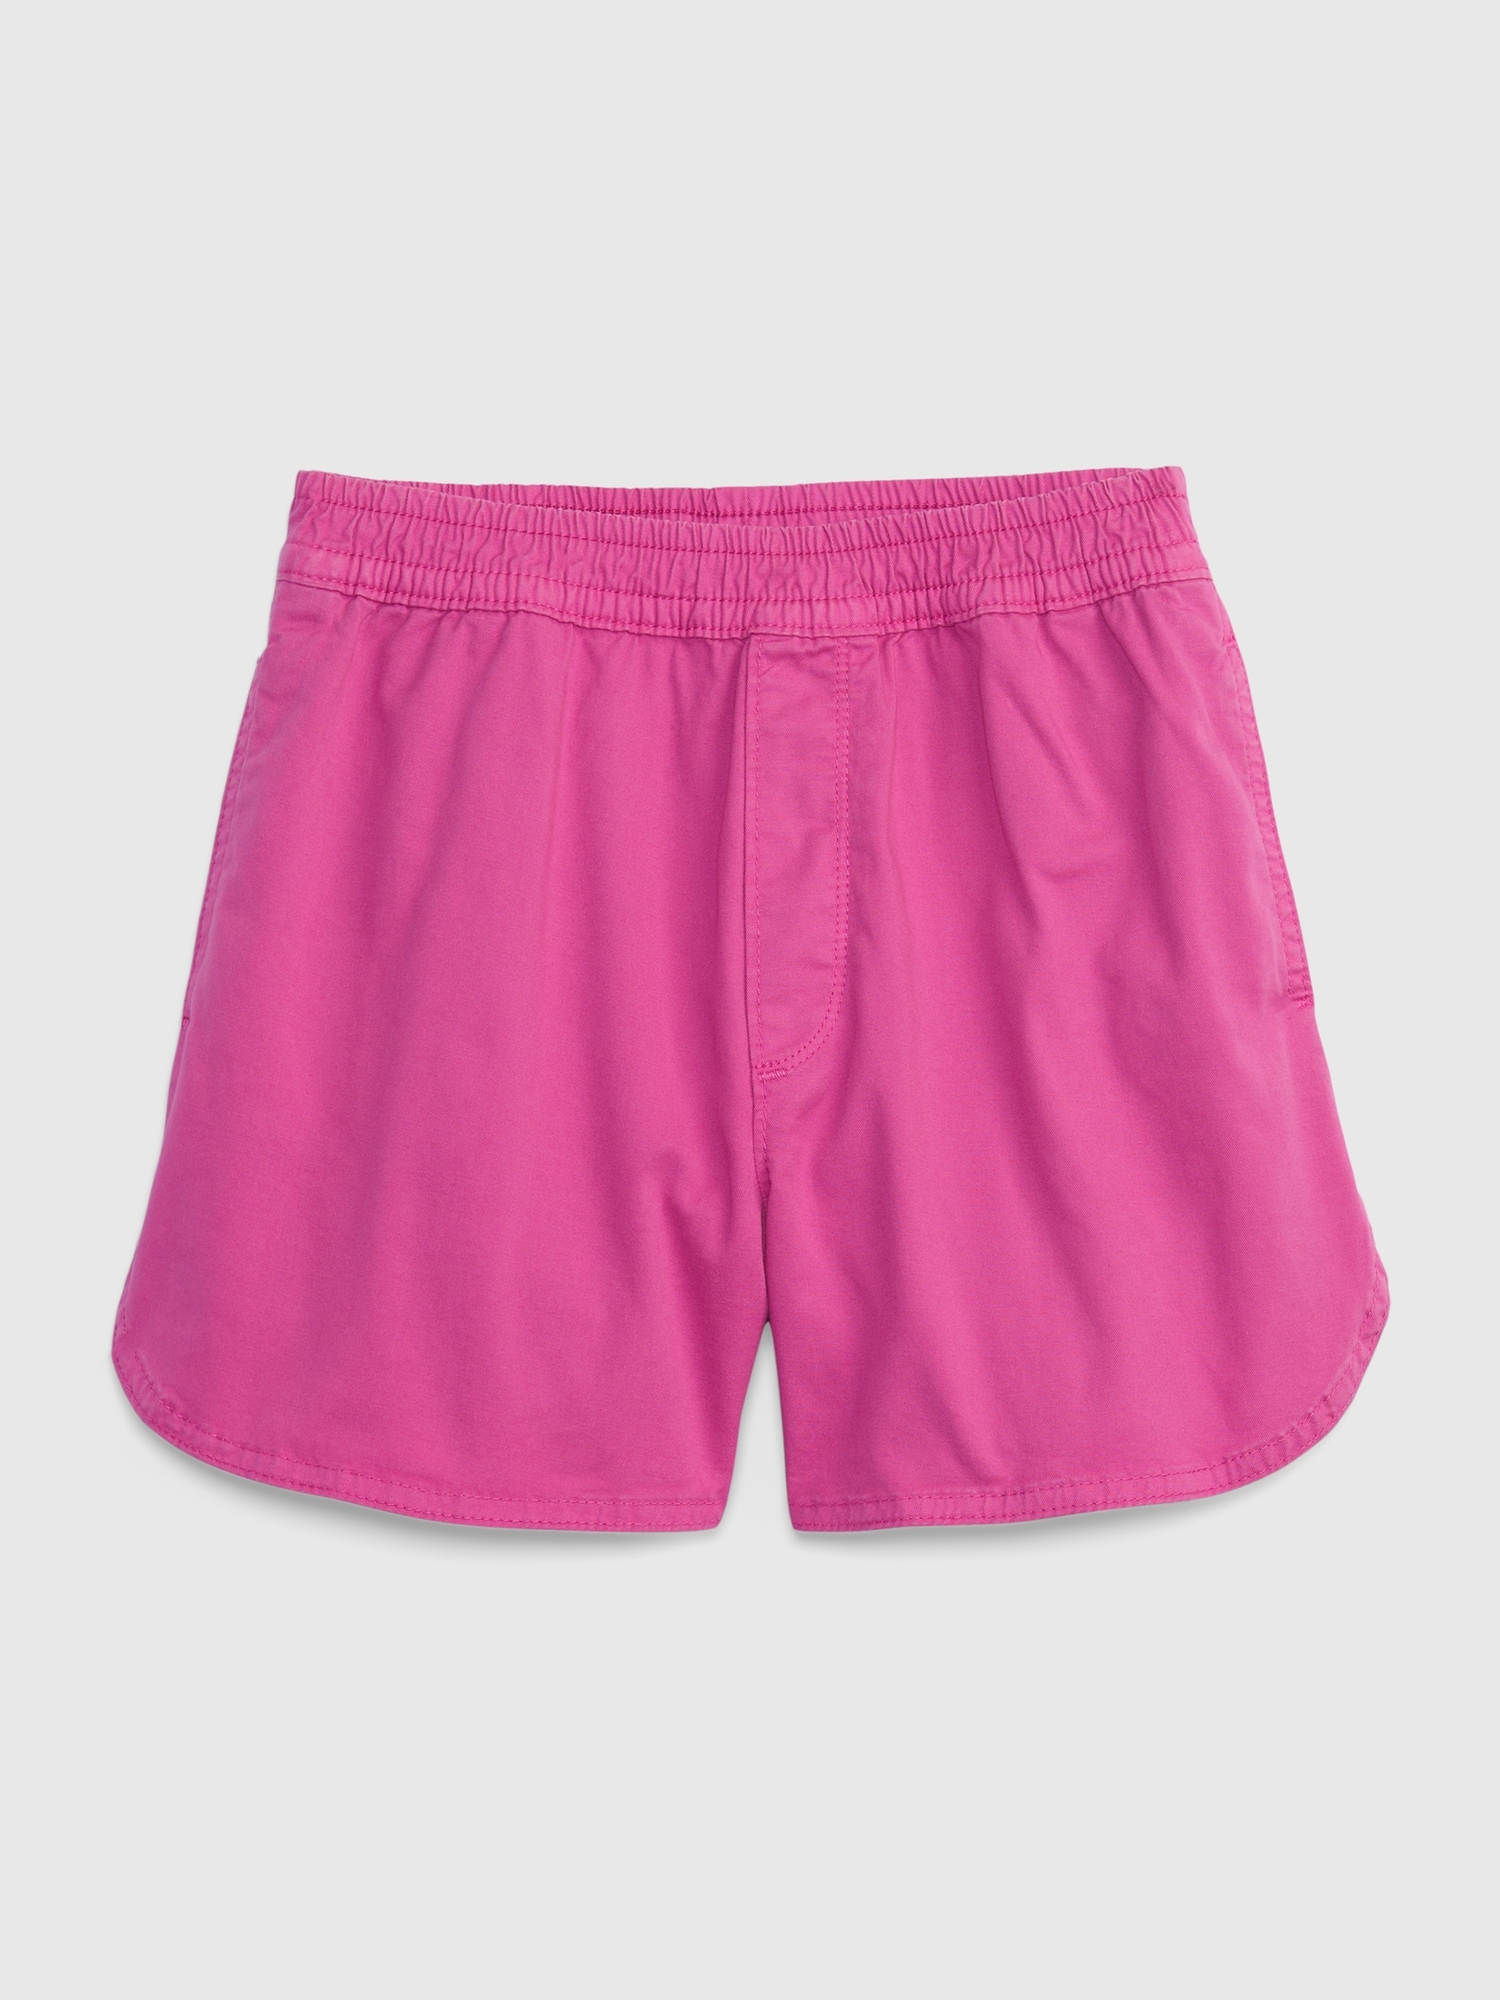 Kids Pull-On Dolphin Shorts